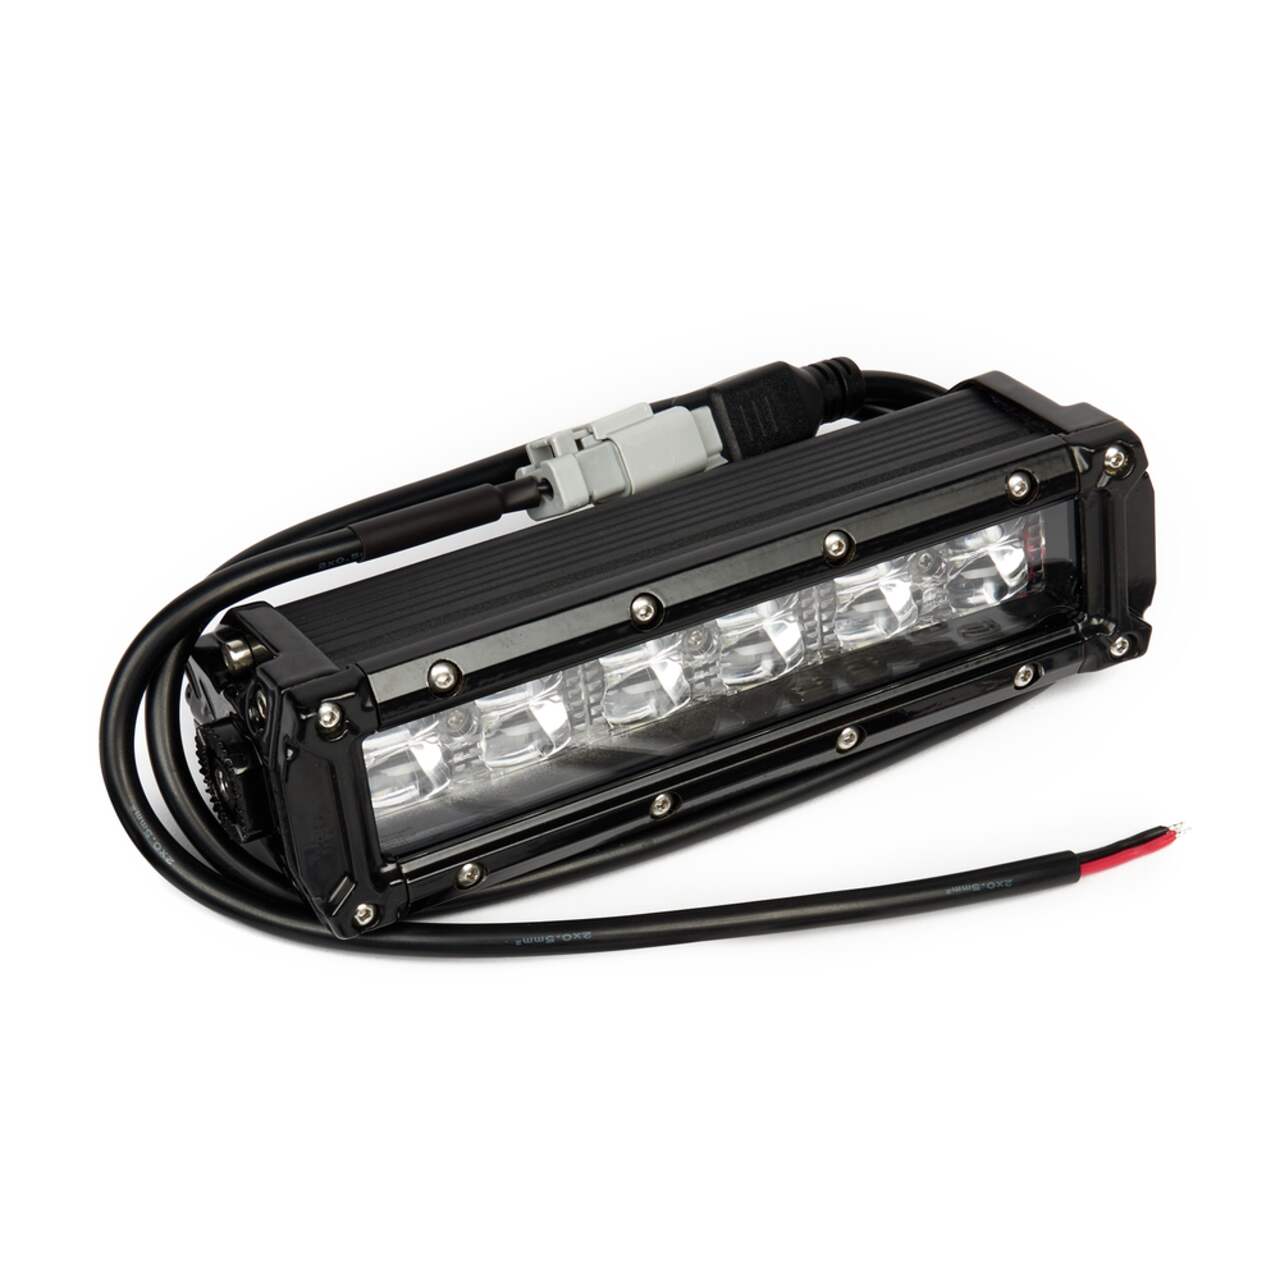 https://media-www.canadiantire.ca/product/automotive/automotive-outdoor-adventure/auto-travel-storage/0203792/slim-bar-7-led-light-bar-7286e8f7-307f-416a-abeb-967a41df5412.png?imdensity=1&imwidth=640&impolicy=mZoom